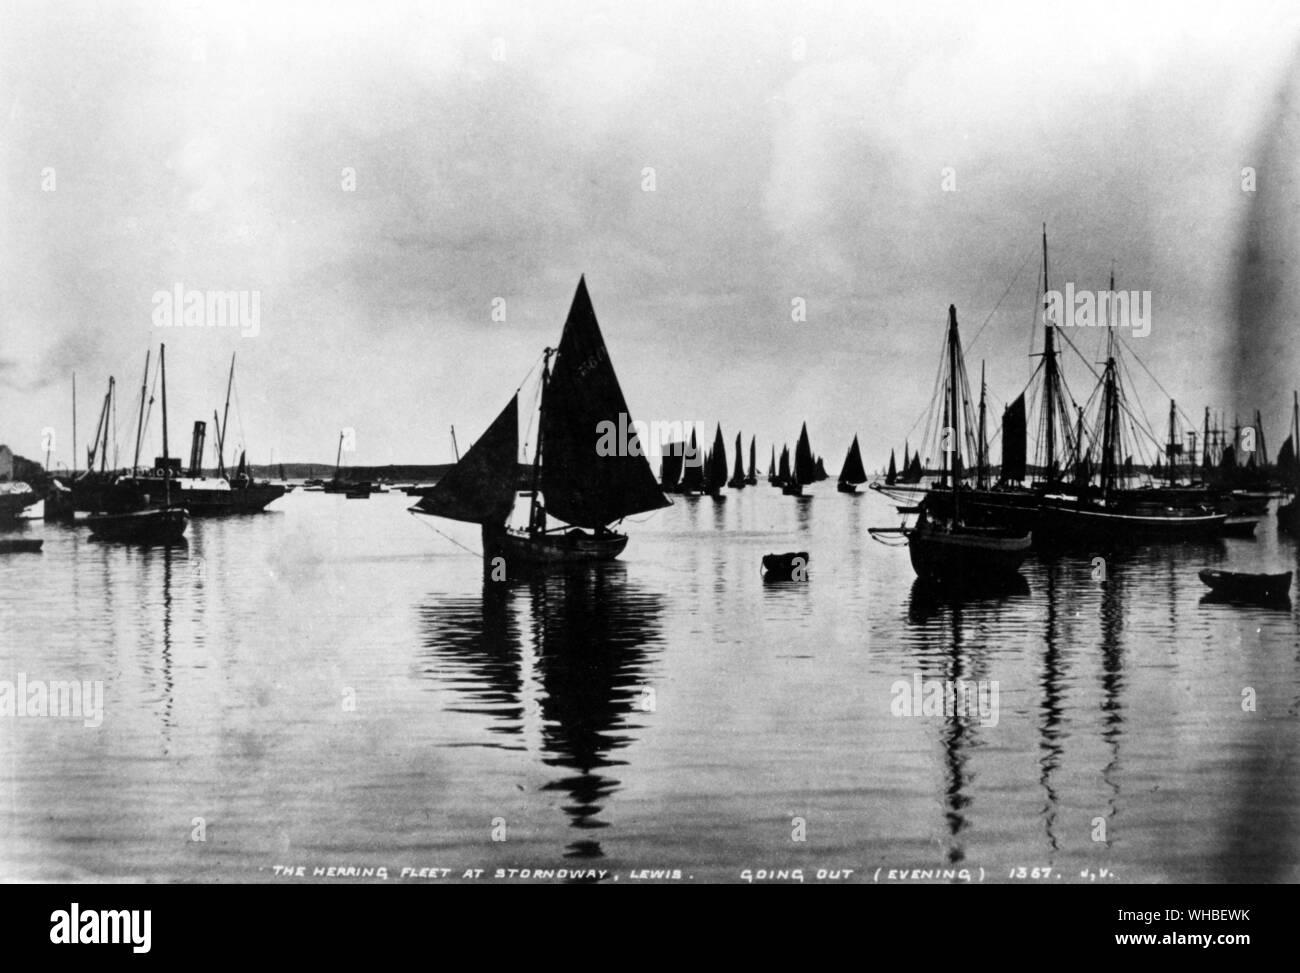 The herring fleet at Stornoway, Lewis, going out in the evening - 1367. Stock Photo